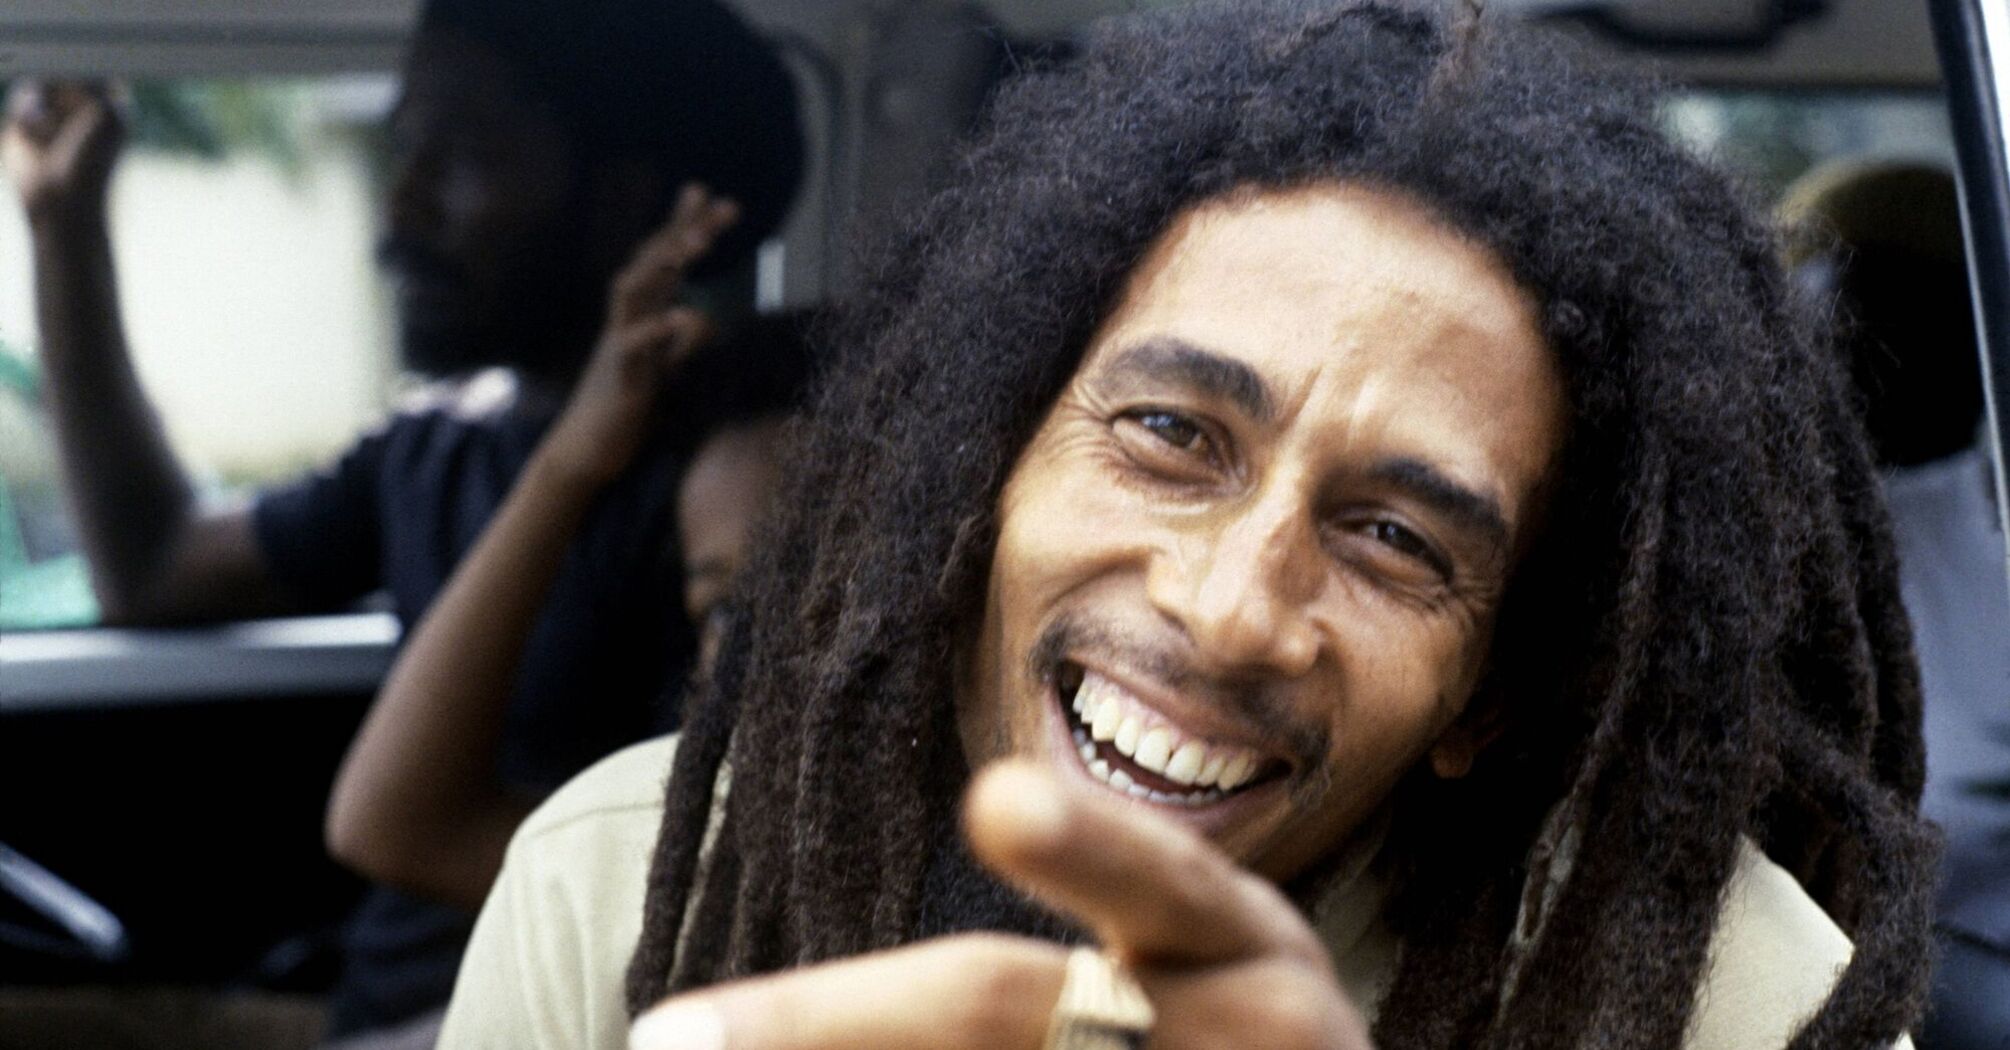 5 fascinating facts about Bob Marley